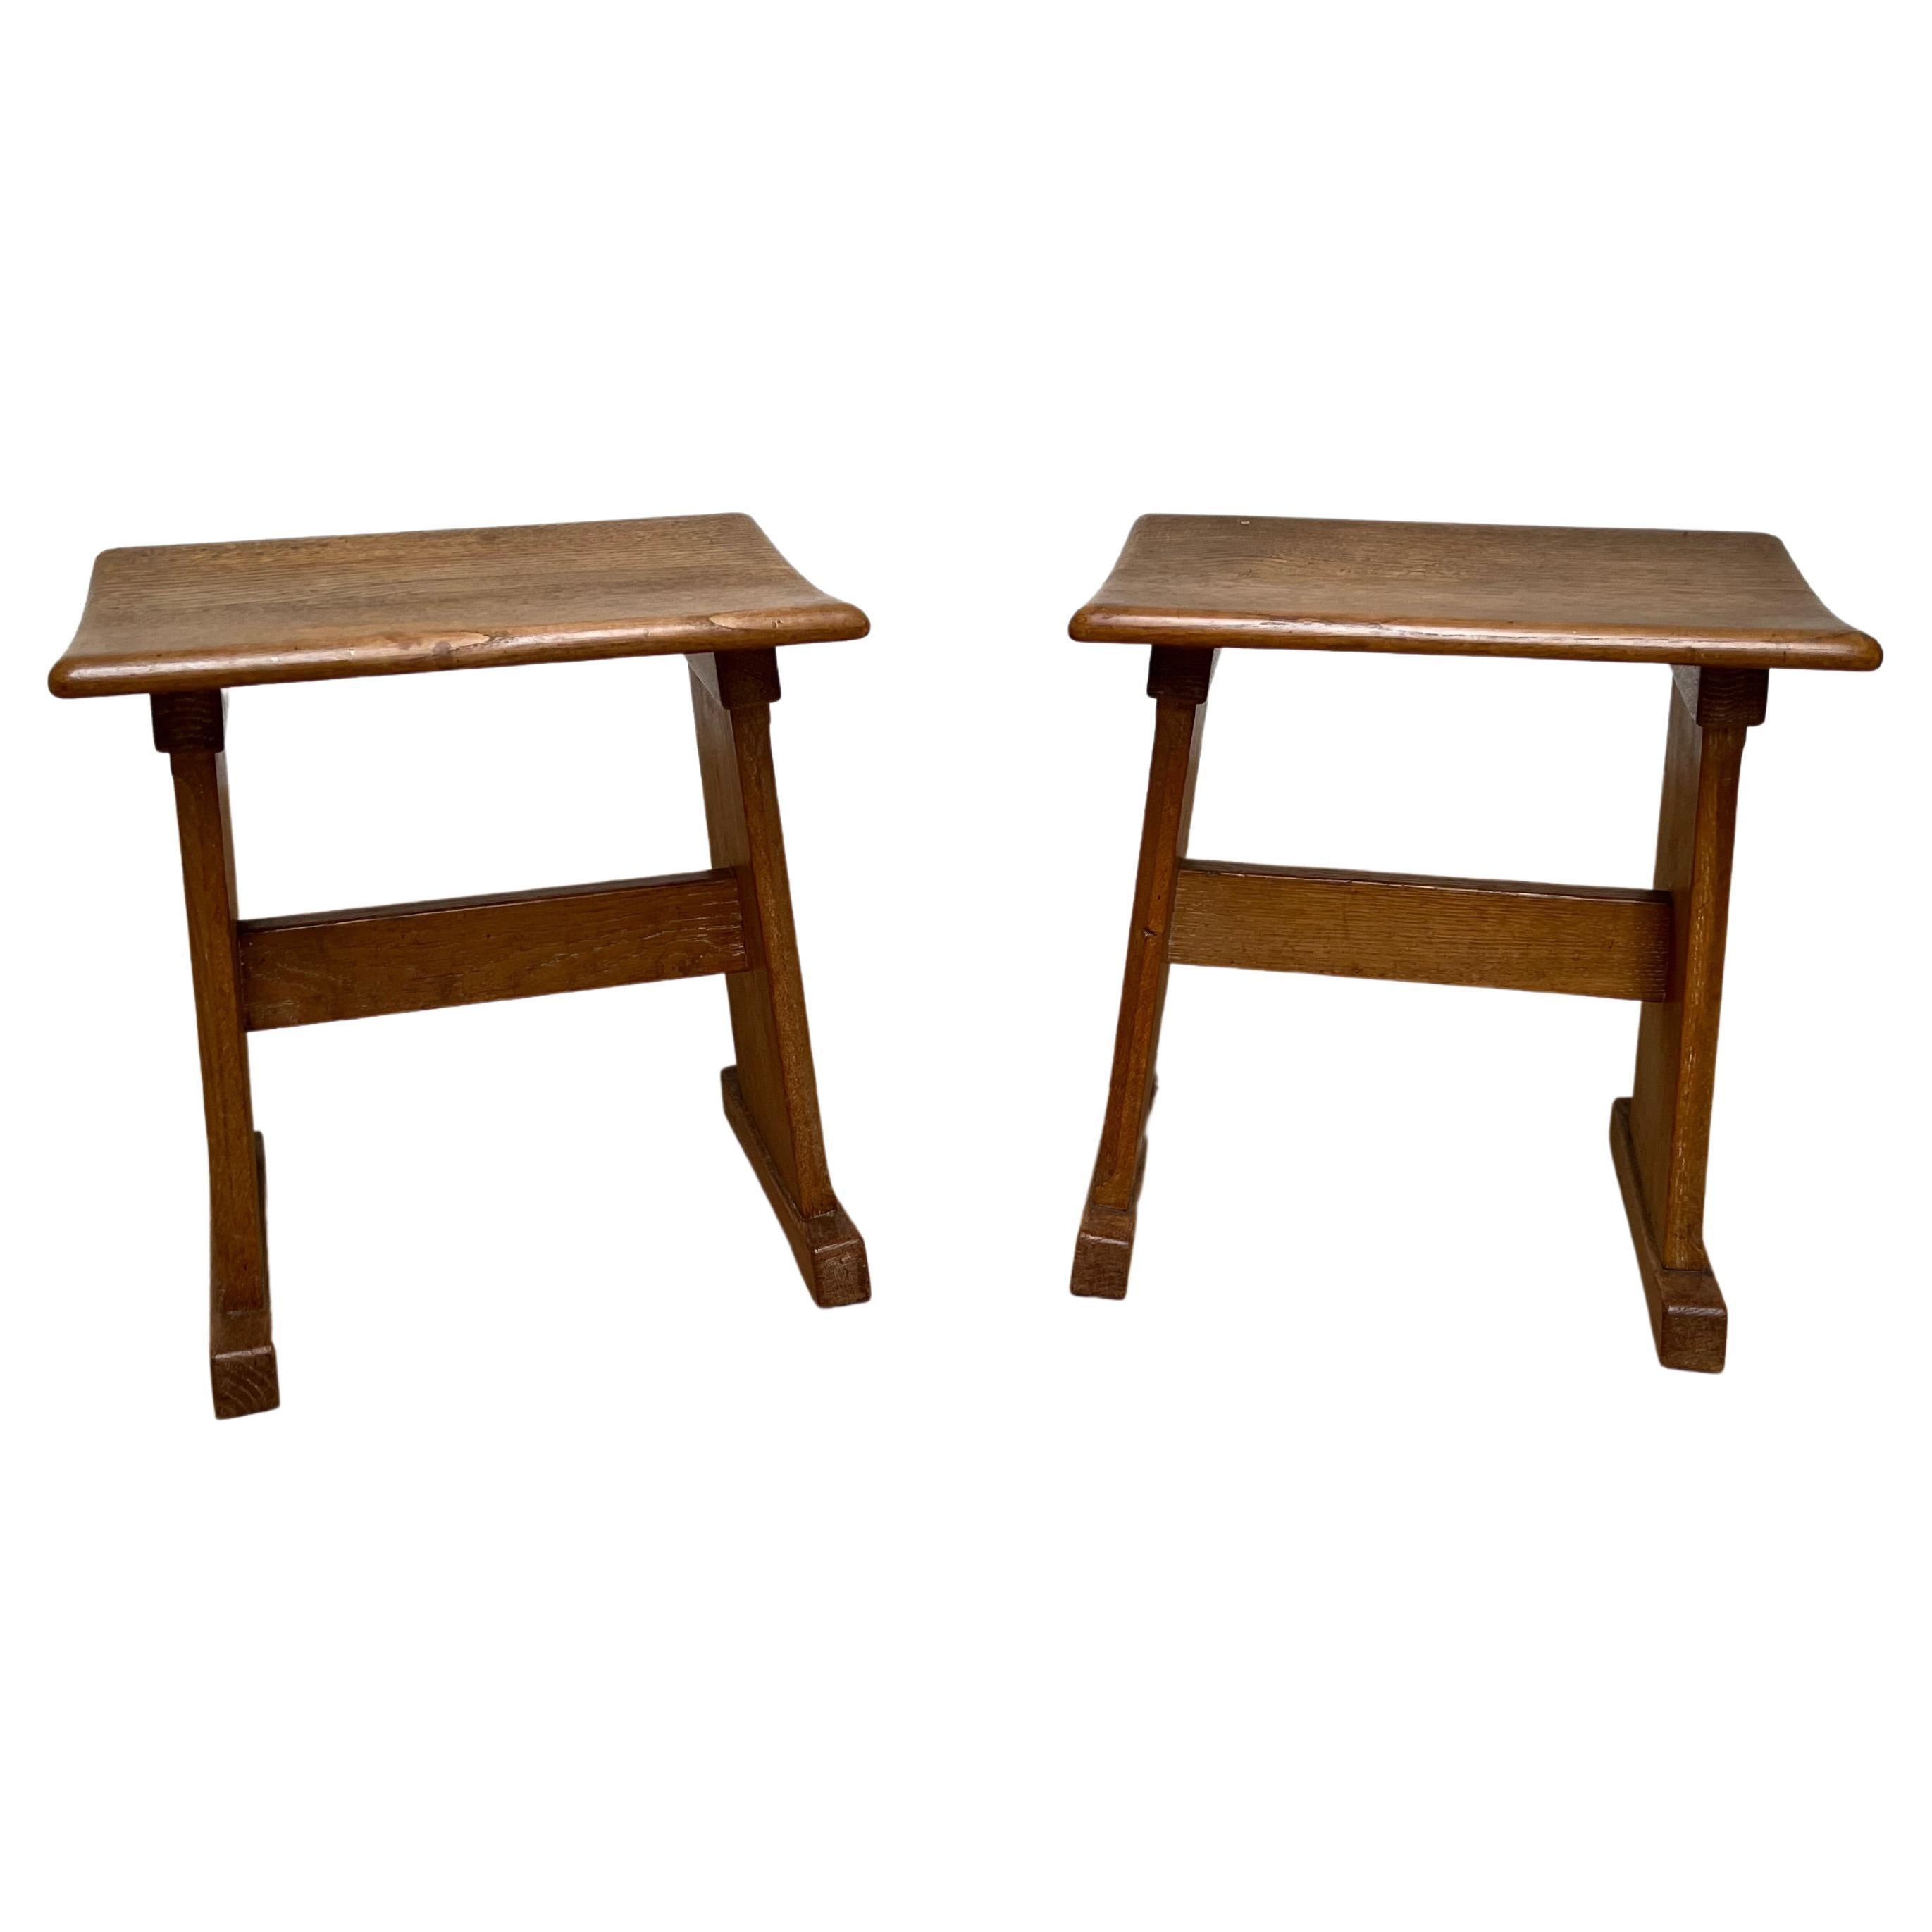 Great style and wonderful condition pair of semi-antique solid oak stools.

Finding this rare pair of vintage stools was a treat and to have found them in this amazing condition made this find even more rewarding. When you are looking for good and